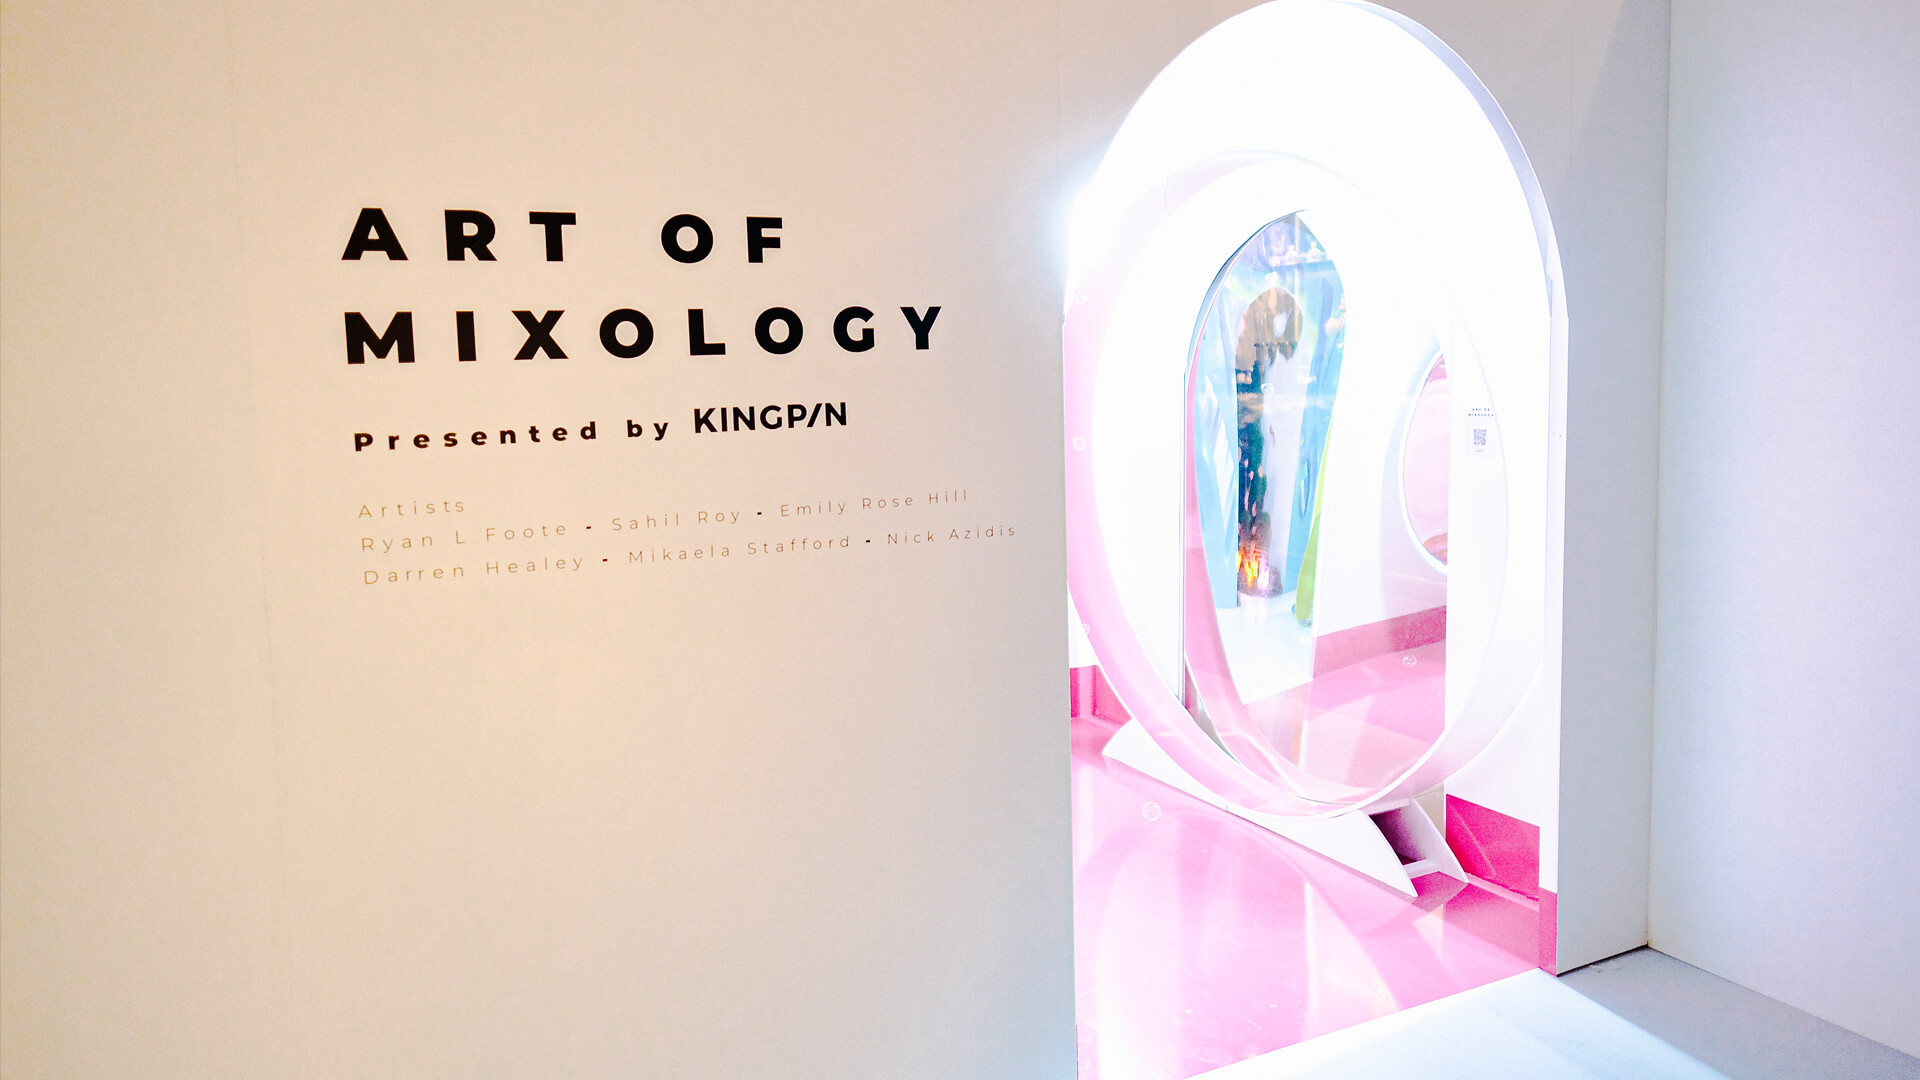 Entry to Art of Mixology art installations brand activation for Kingpin 